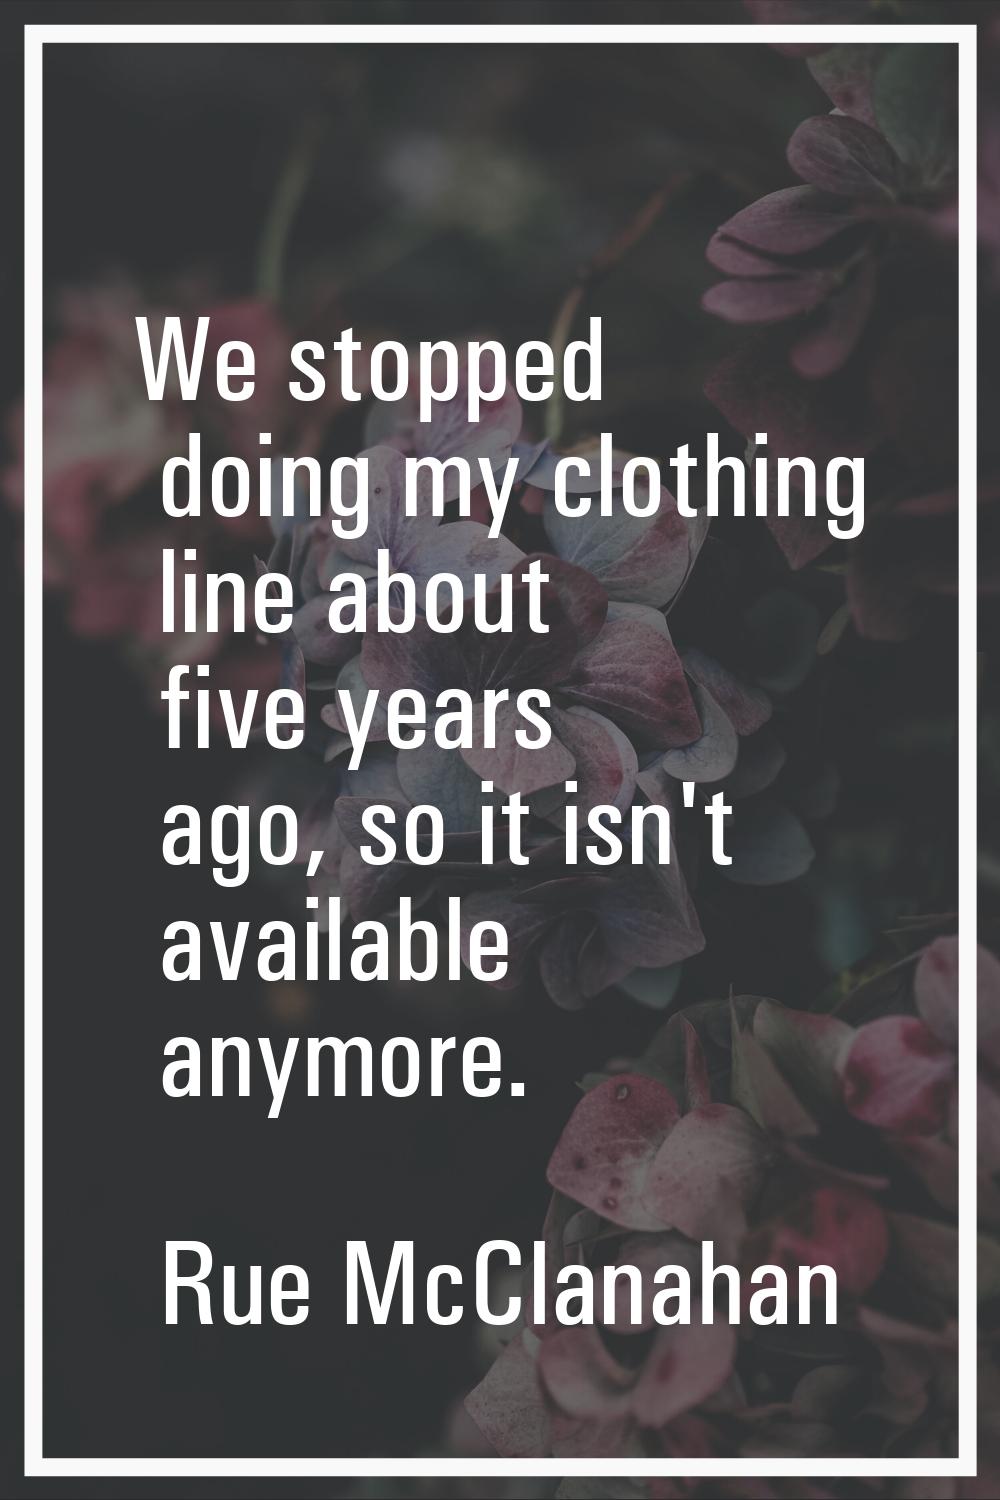 We stopped doing my clothing line about five years ago, so it isn't available anymore.